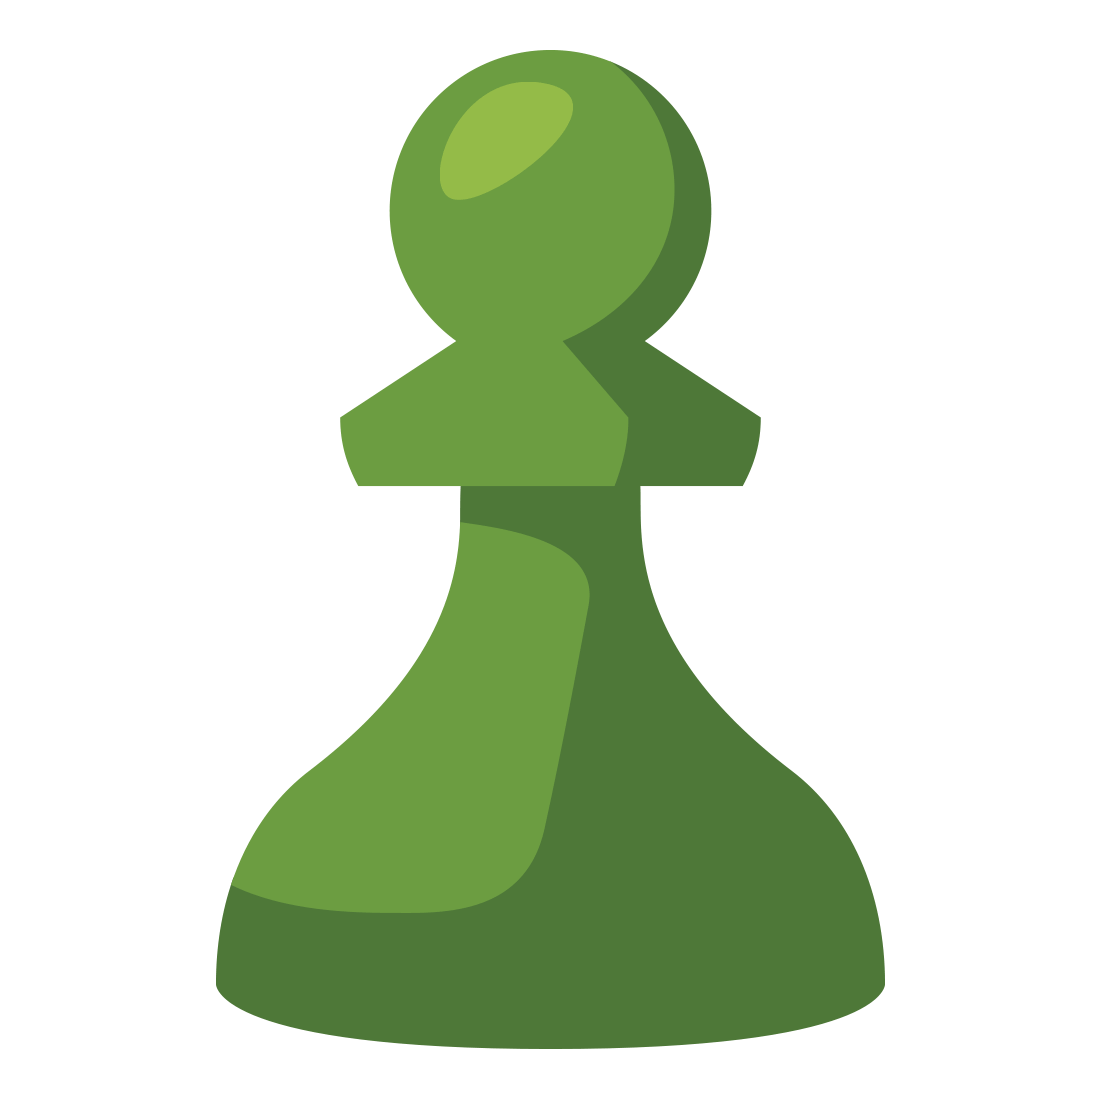 Woedend communicatie Napier Chess.com - Play Chess Online - Free Games